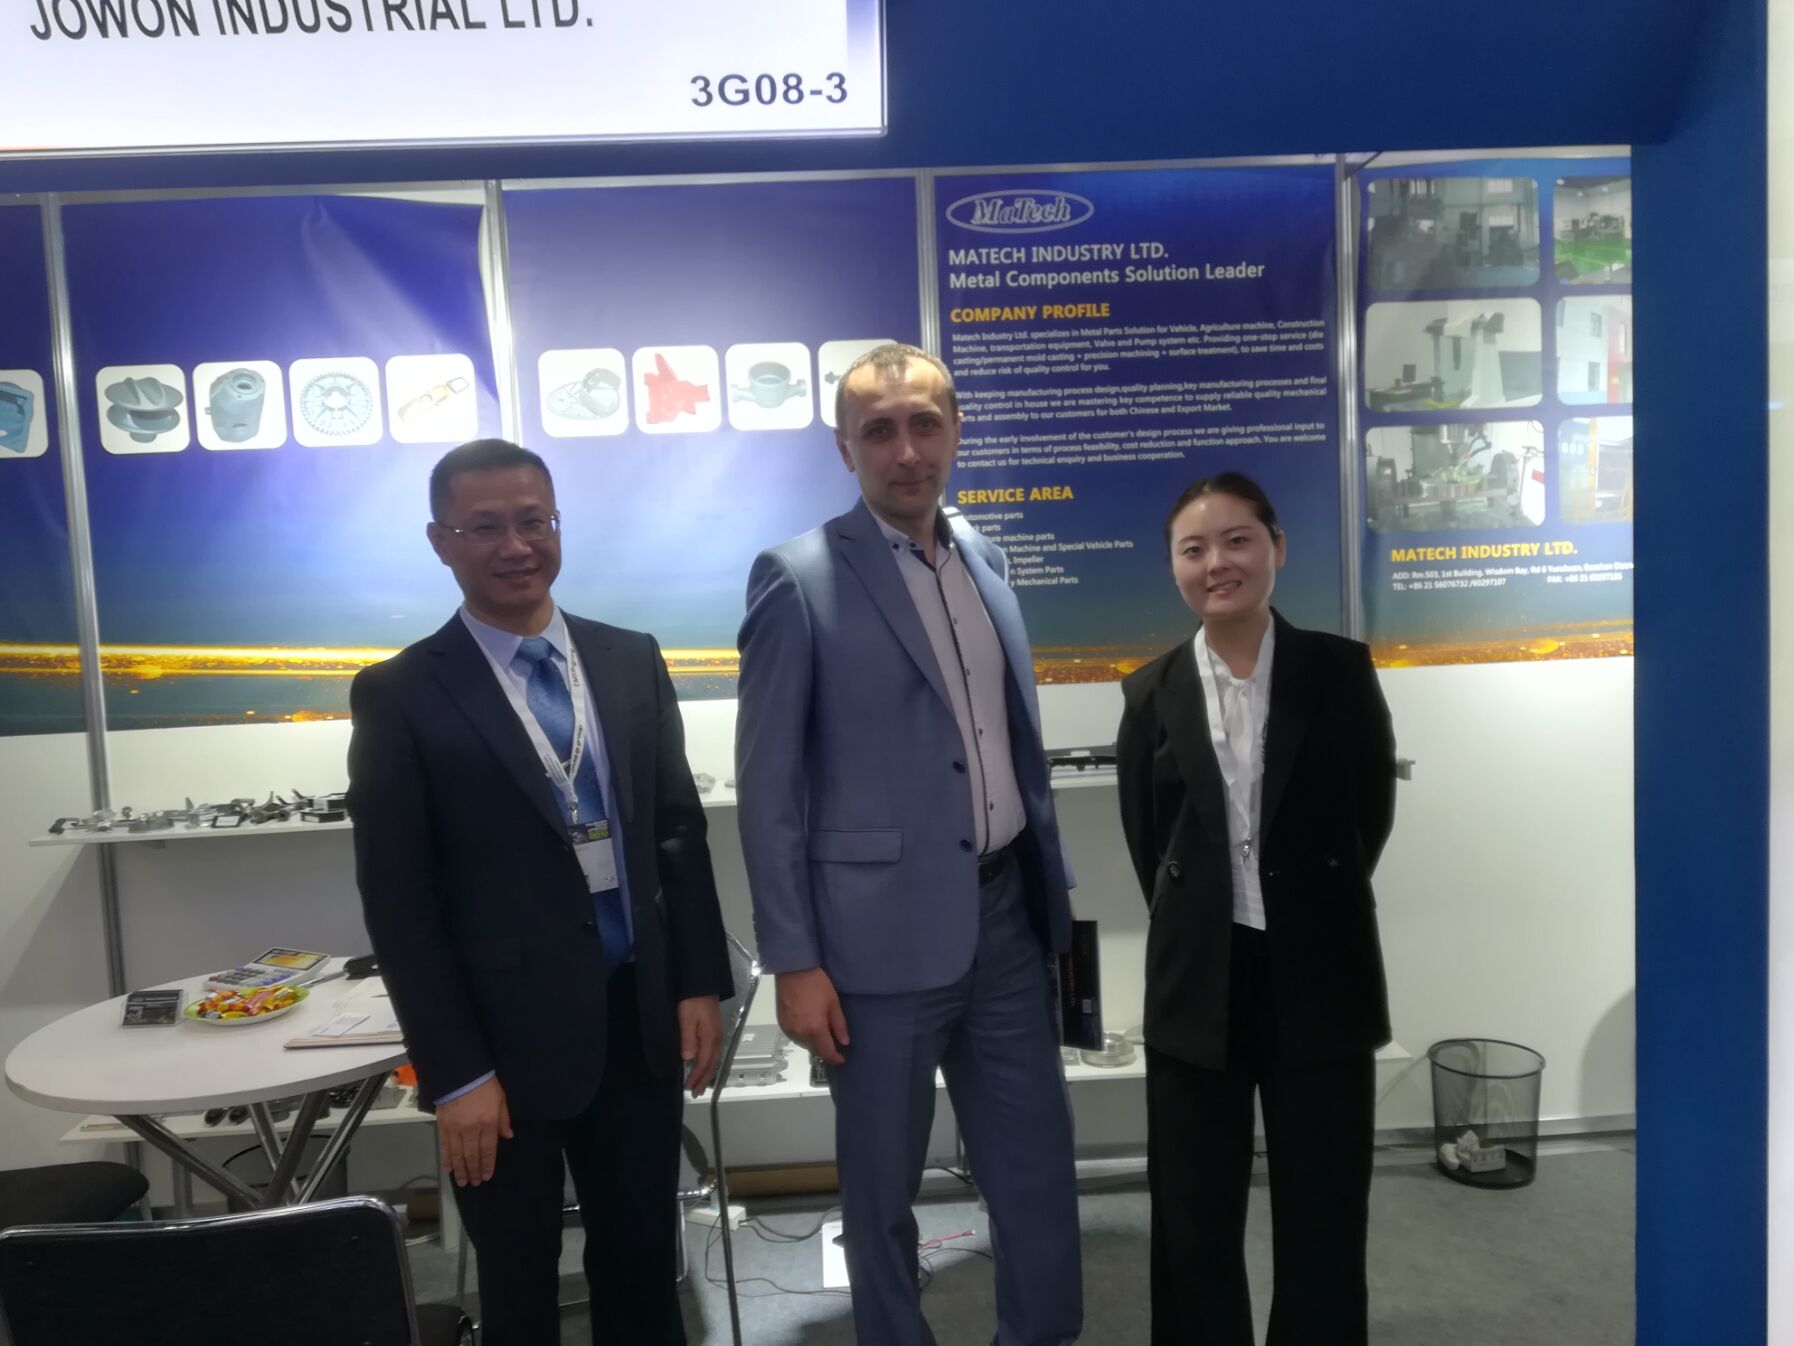 MATECH attended the 2019 NEWCAST Show in Düsseldorf Germany(图3)